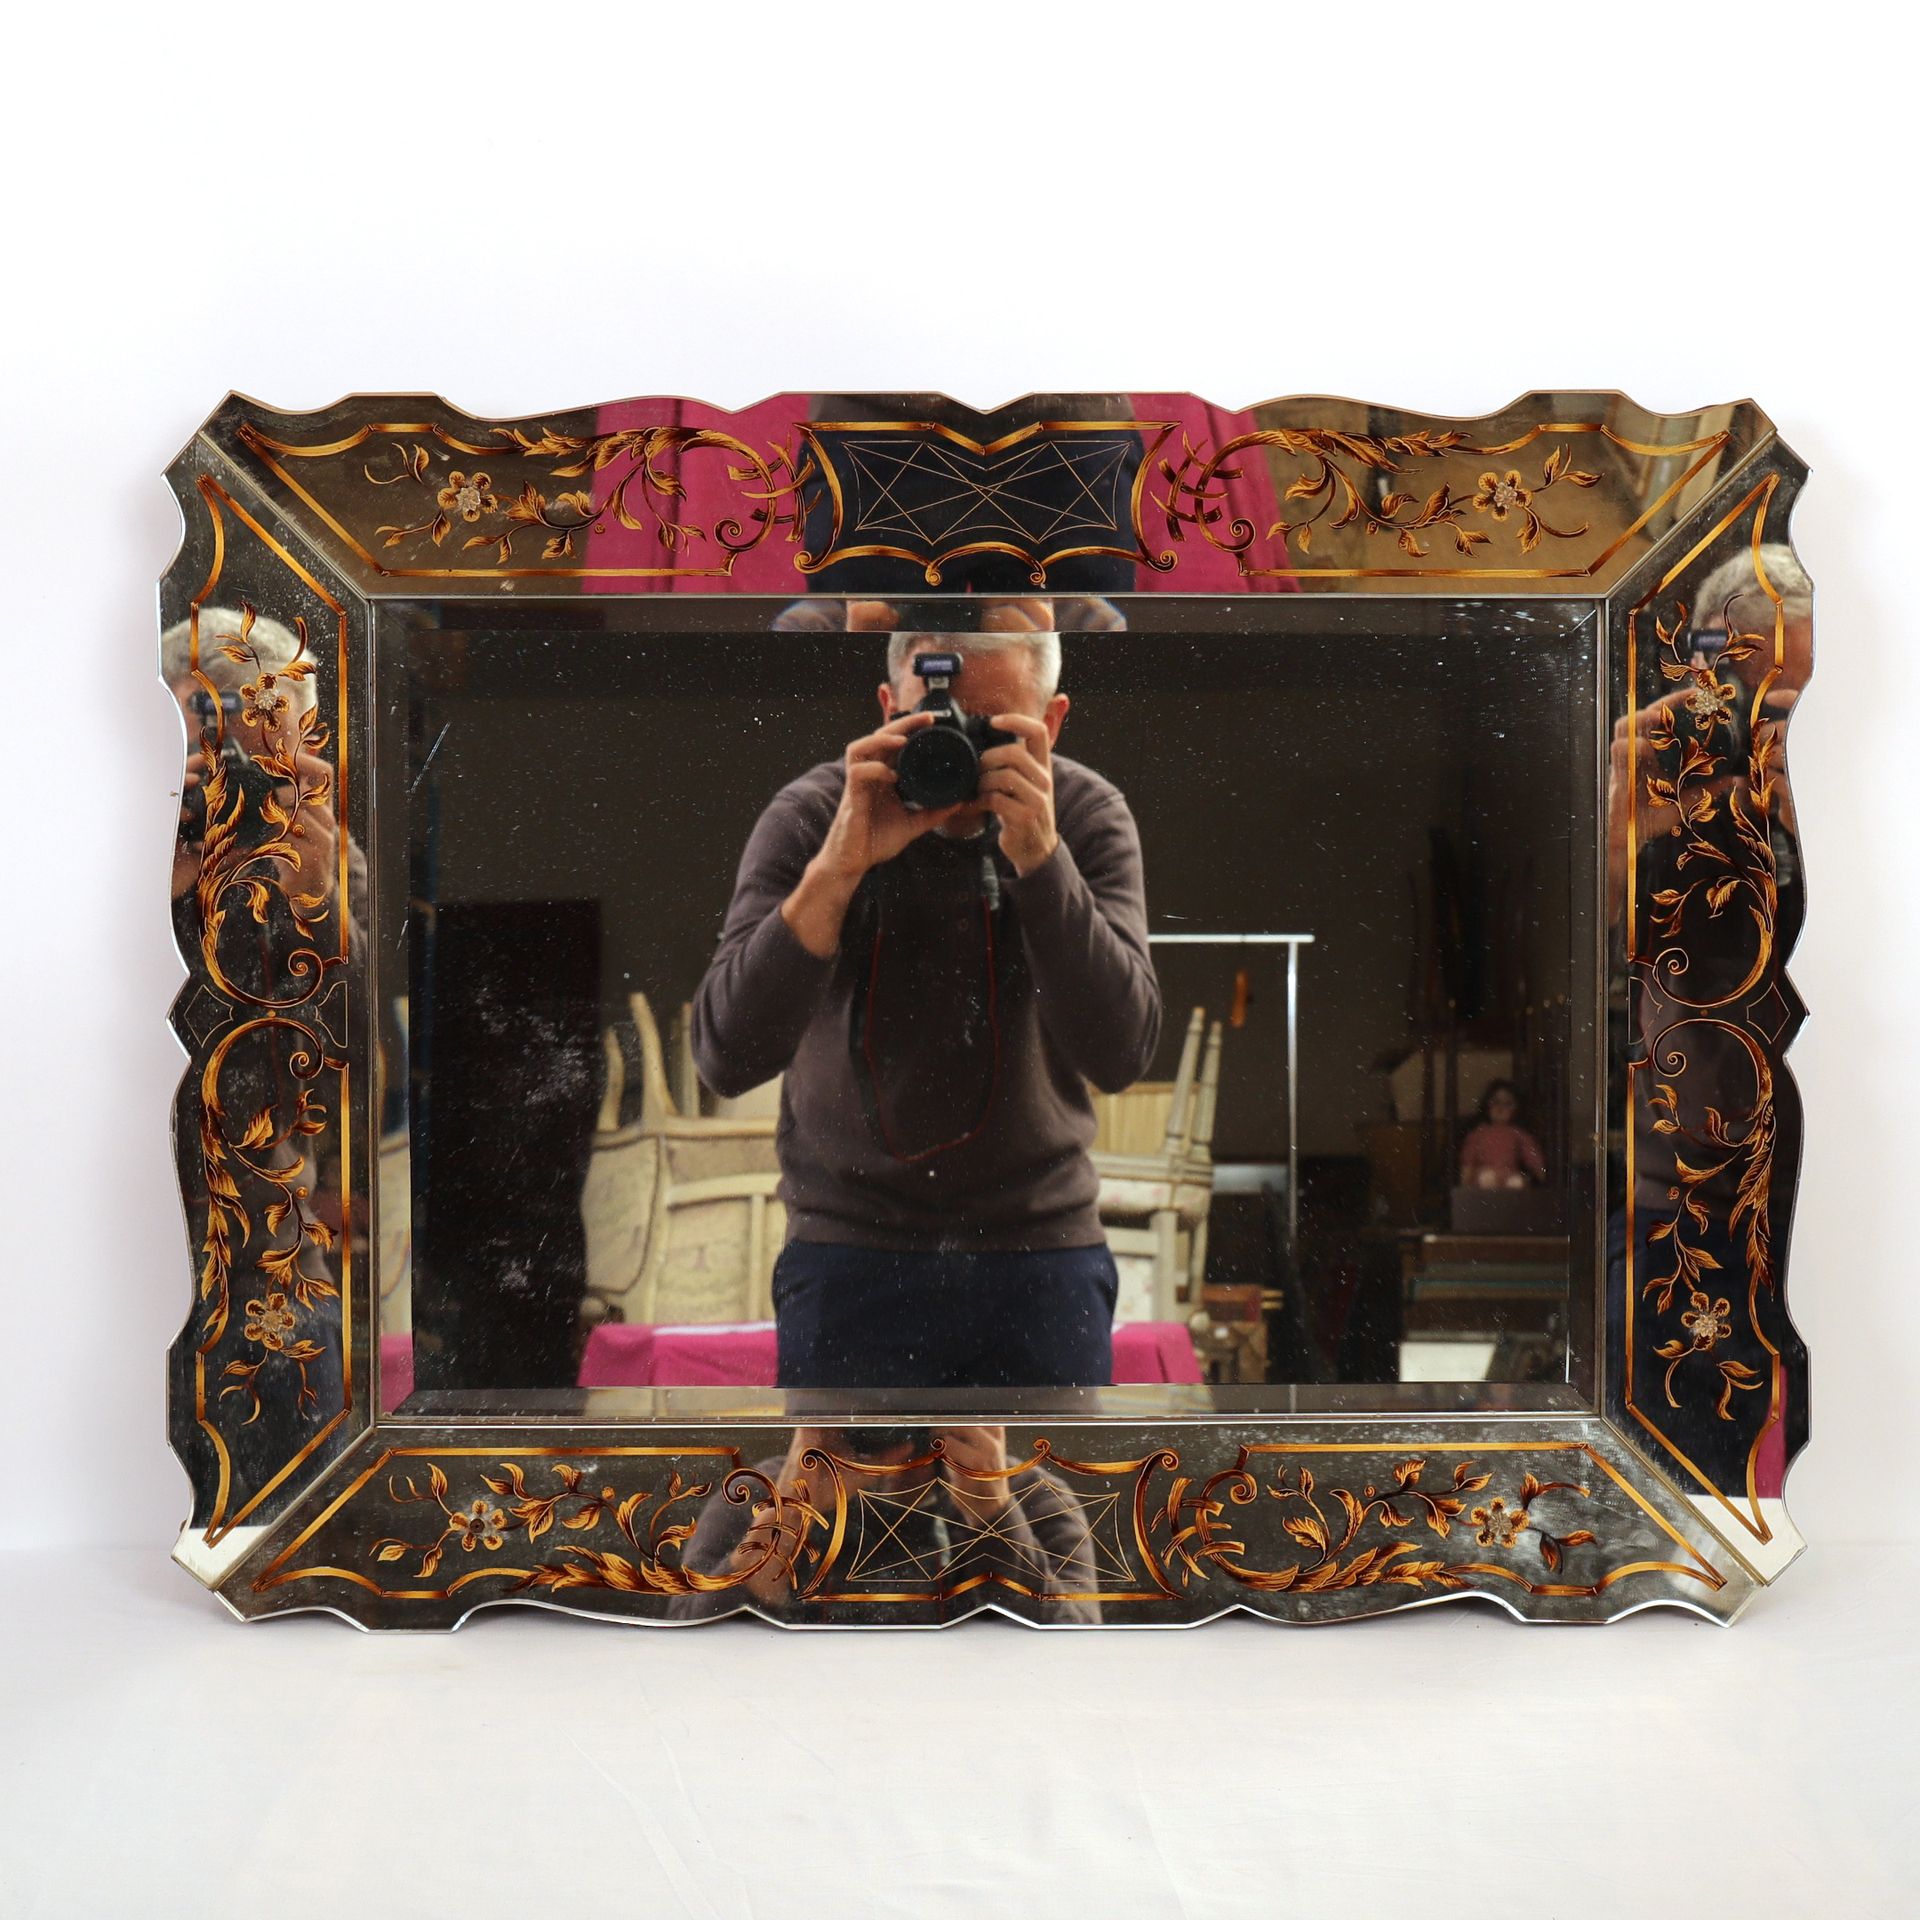 Null RECTANGULAR SHAPED MIRROR IN THE VENETIAN STYLE

Decorated with palmettes a&hellip;